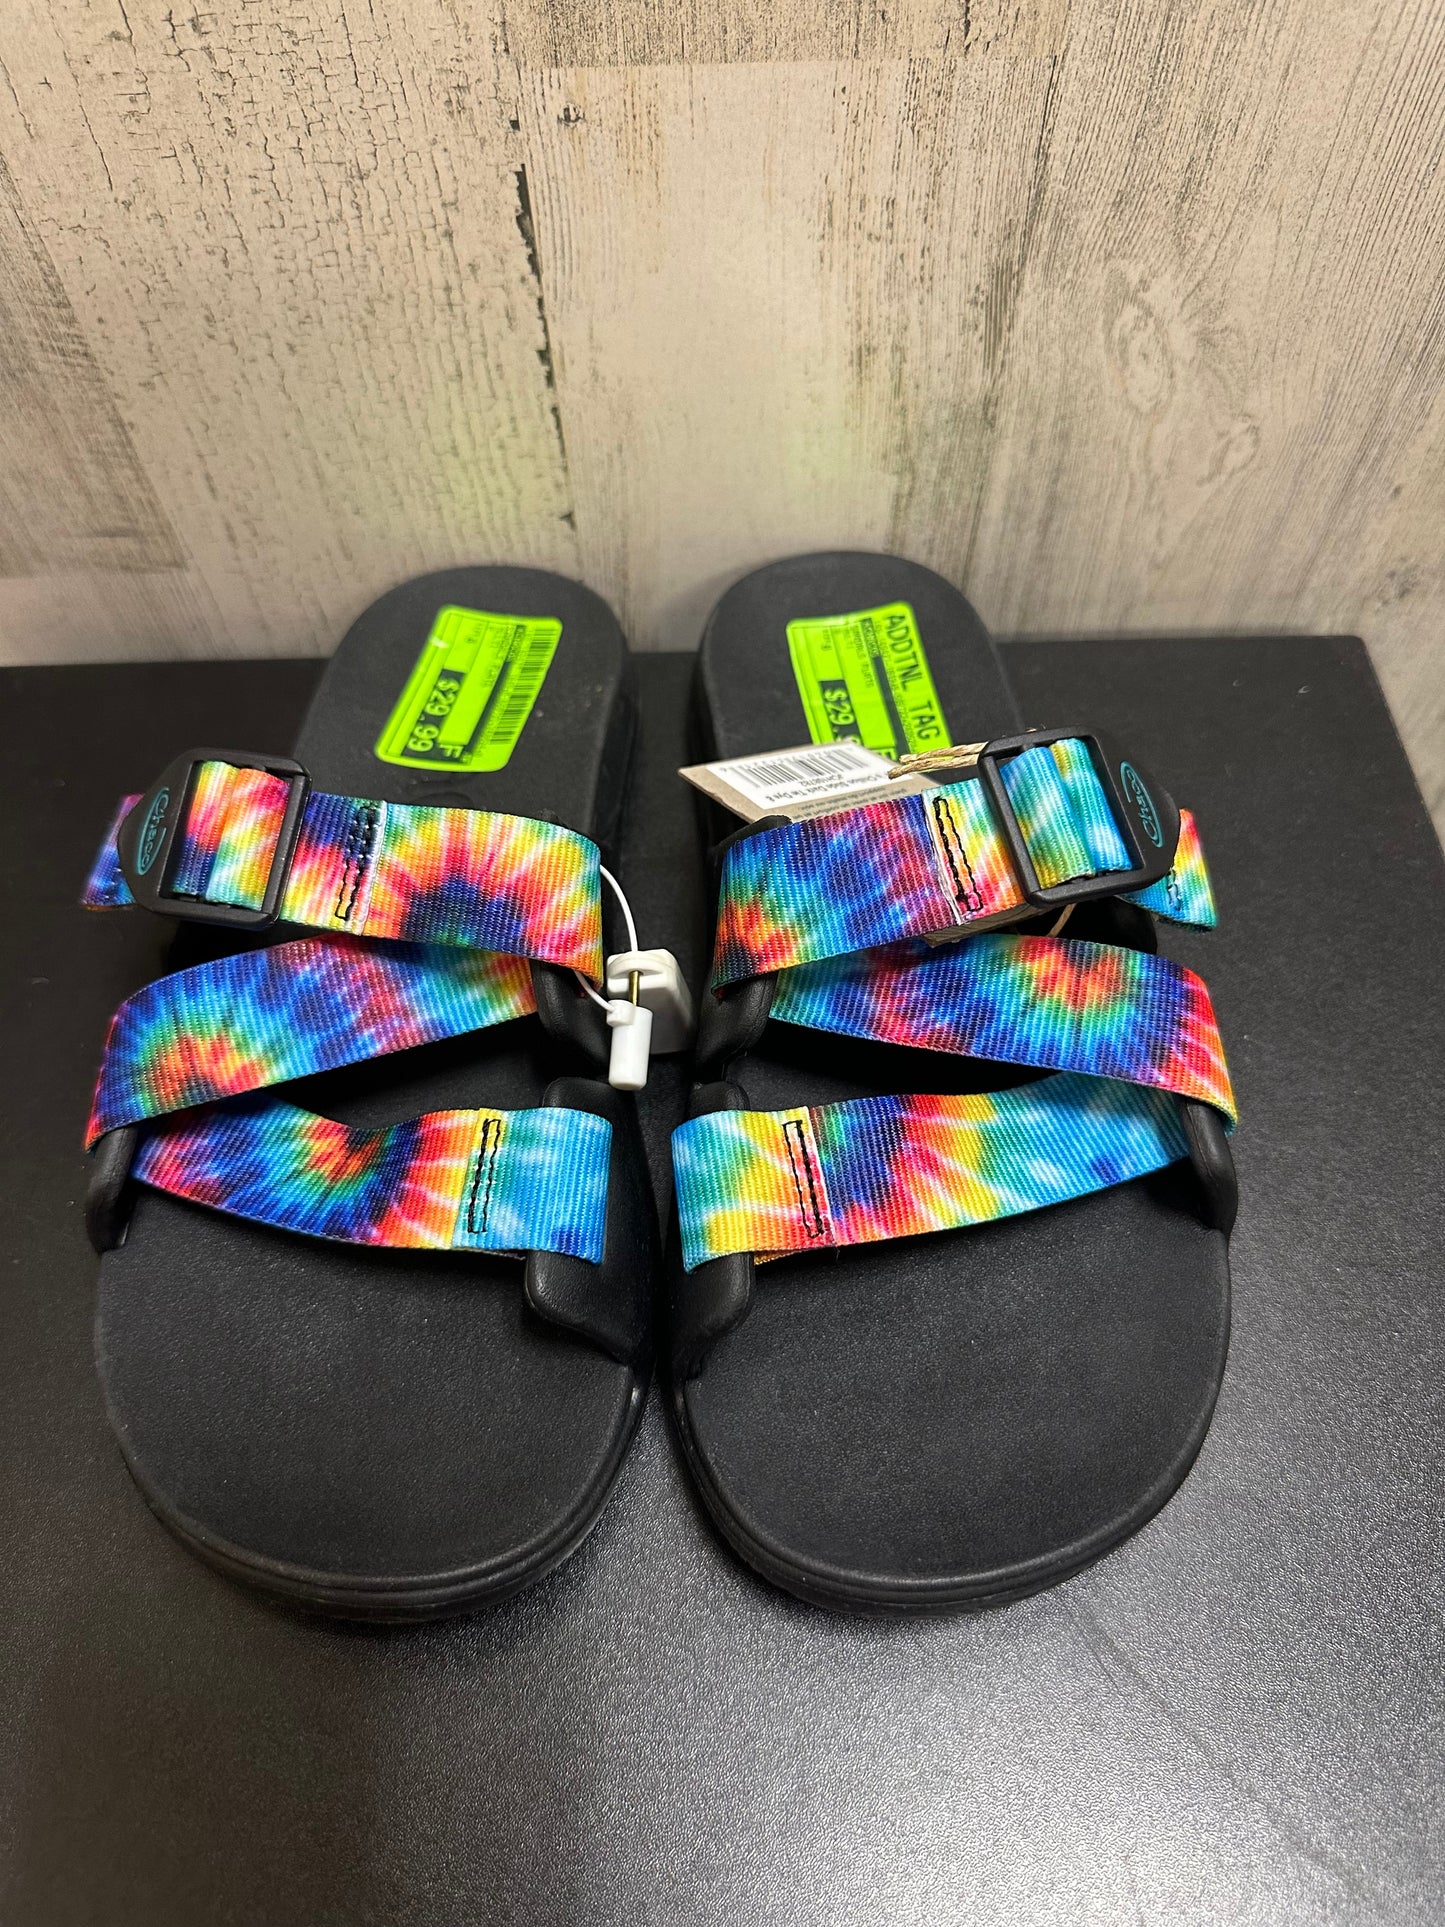 Multi-colored Sandals Flats Chacos, Size 8